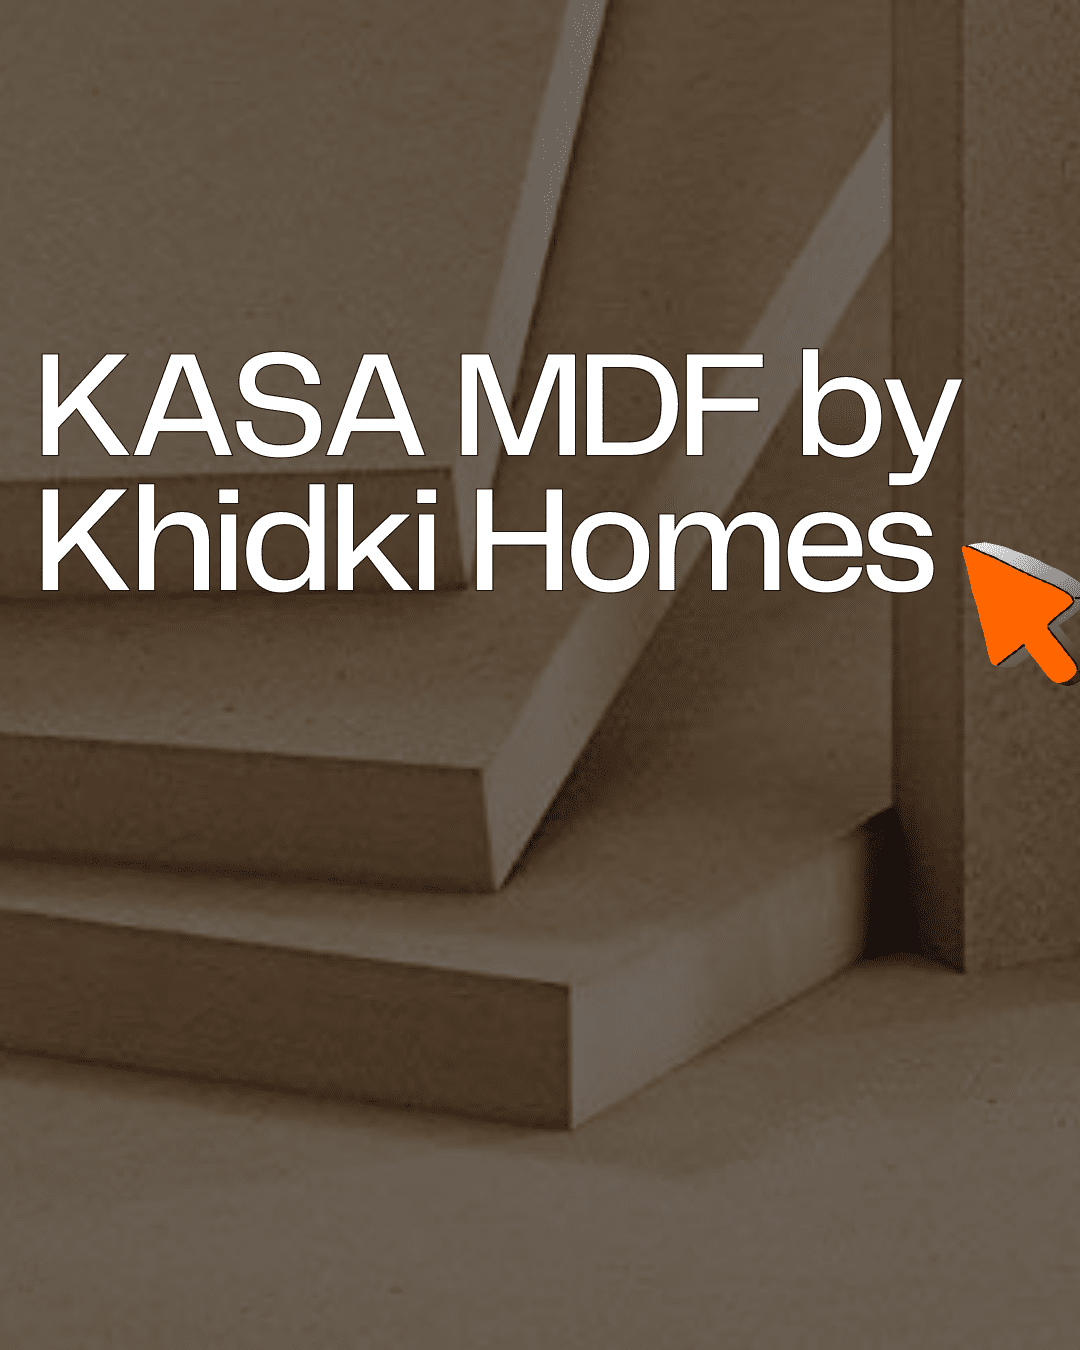 16mm mdf, 12mm mdf, 18mm mdf, 3mm mdf, 2mm mdf, action tesa hdhmr boards and mdf board suppliers in bangalore